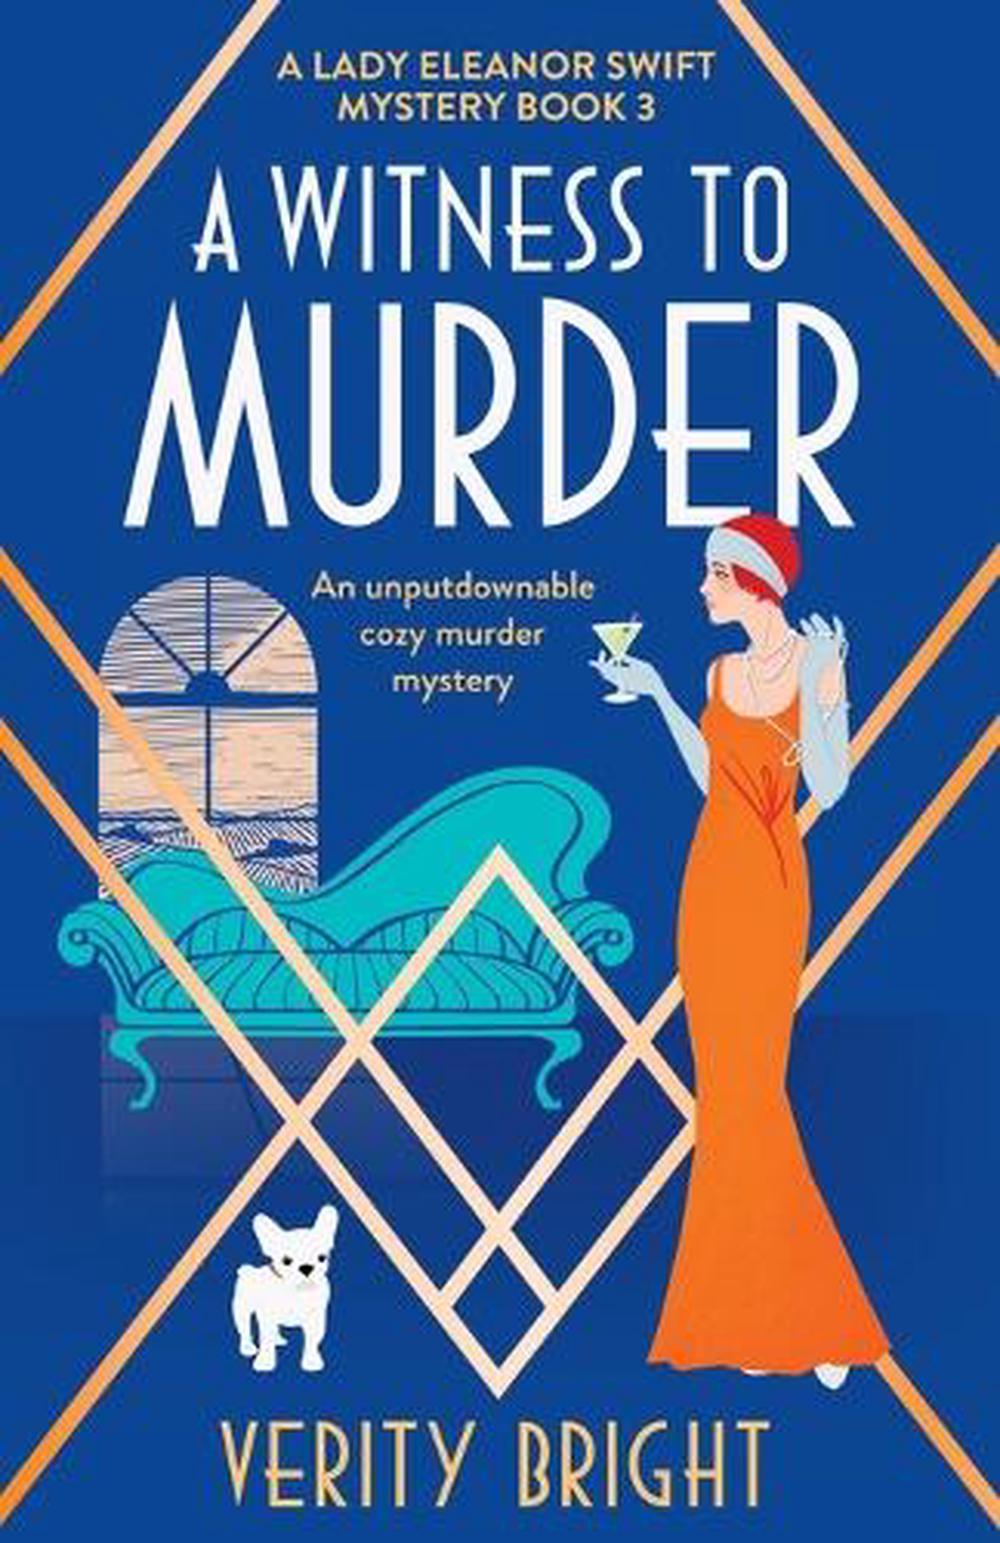 Witness to Murder by Verity Bright, Paperback, 9781838887575 | Buy ...